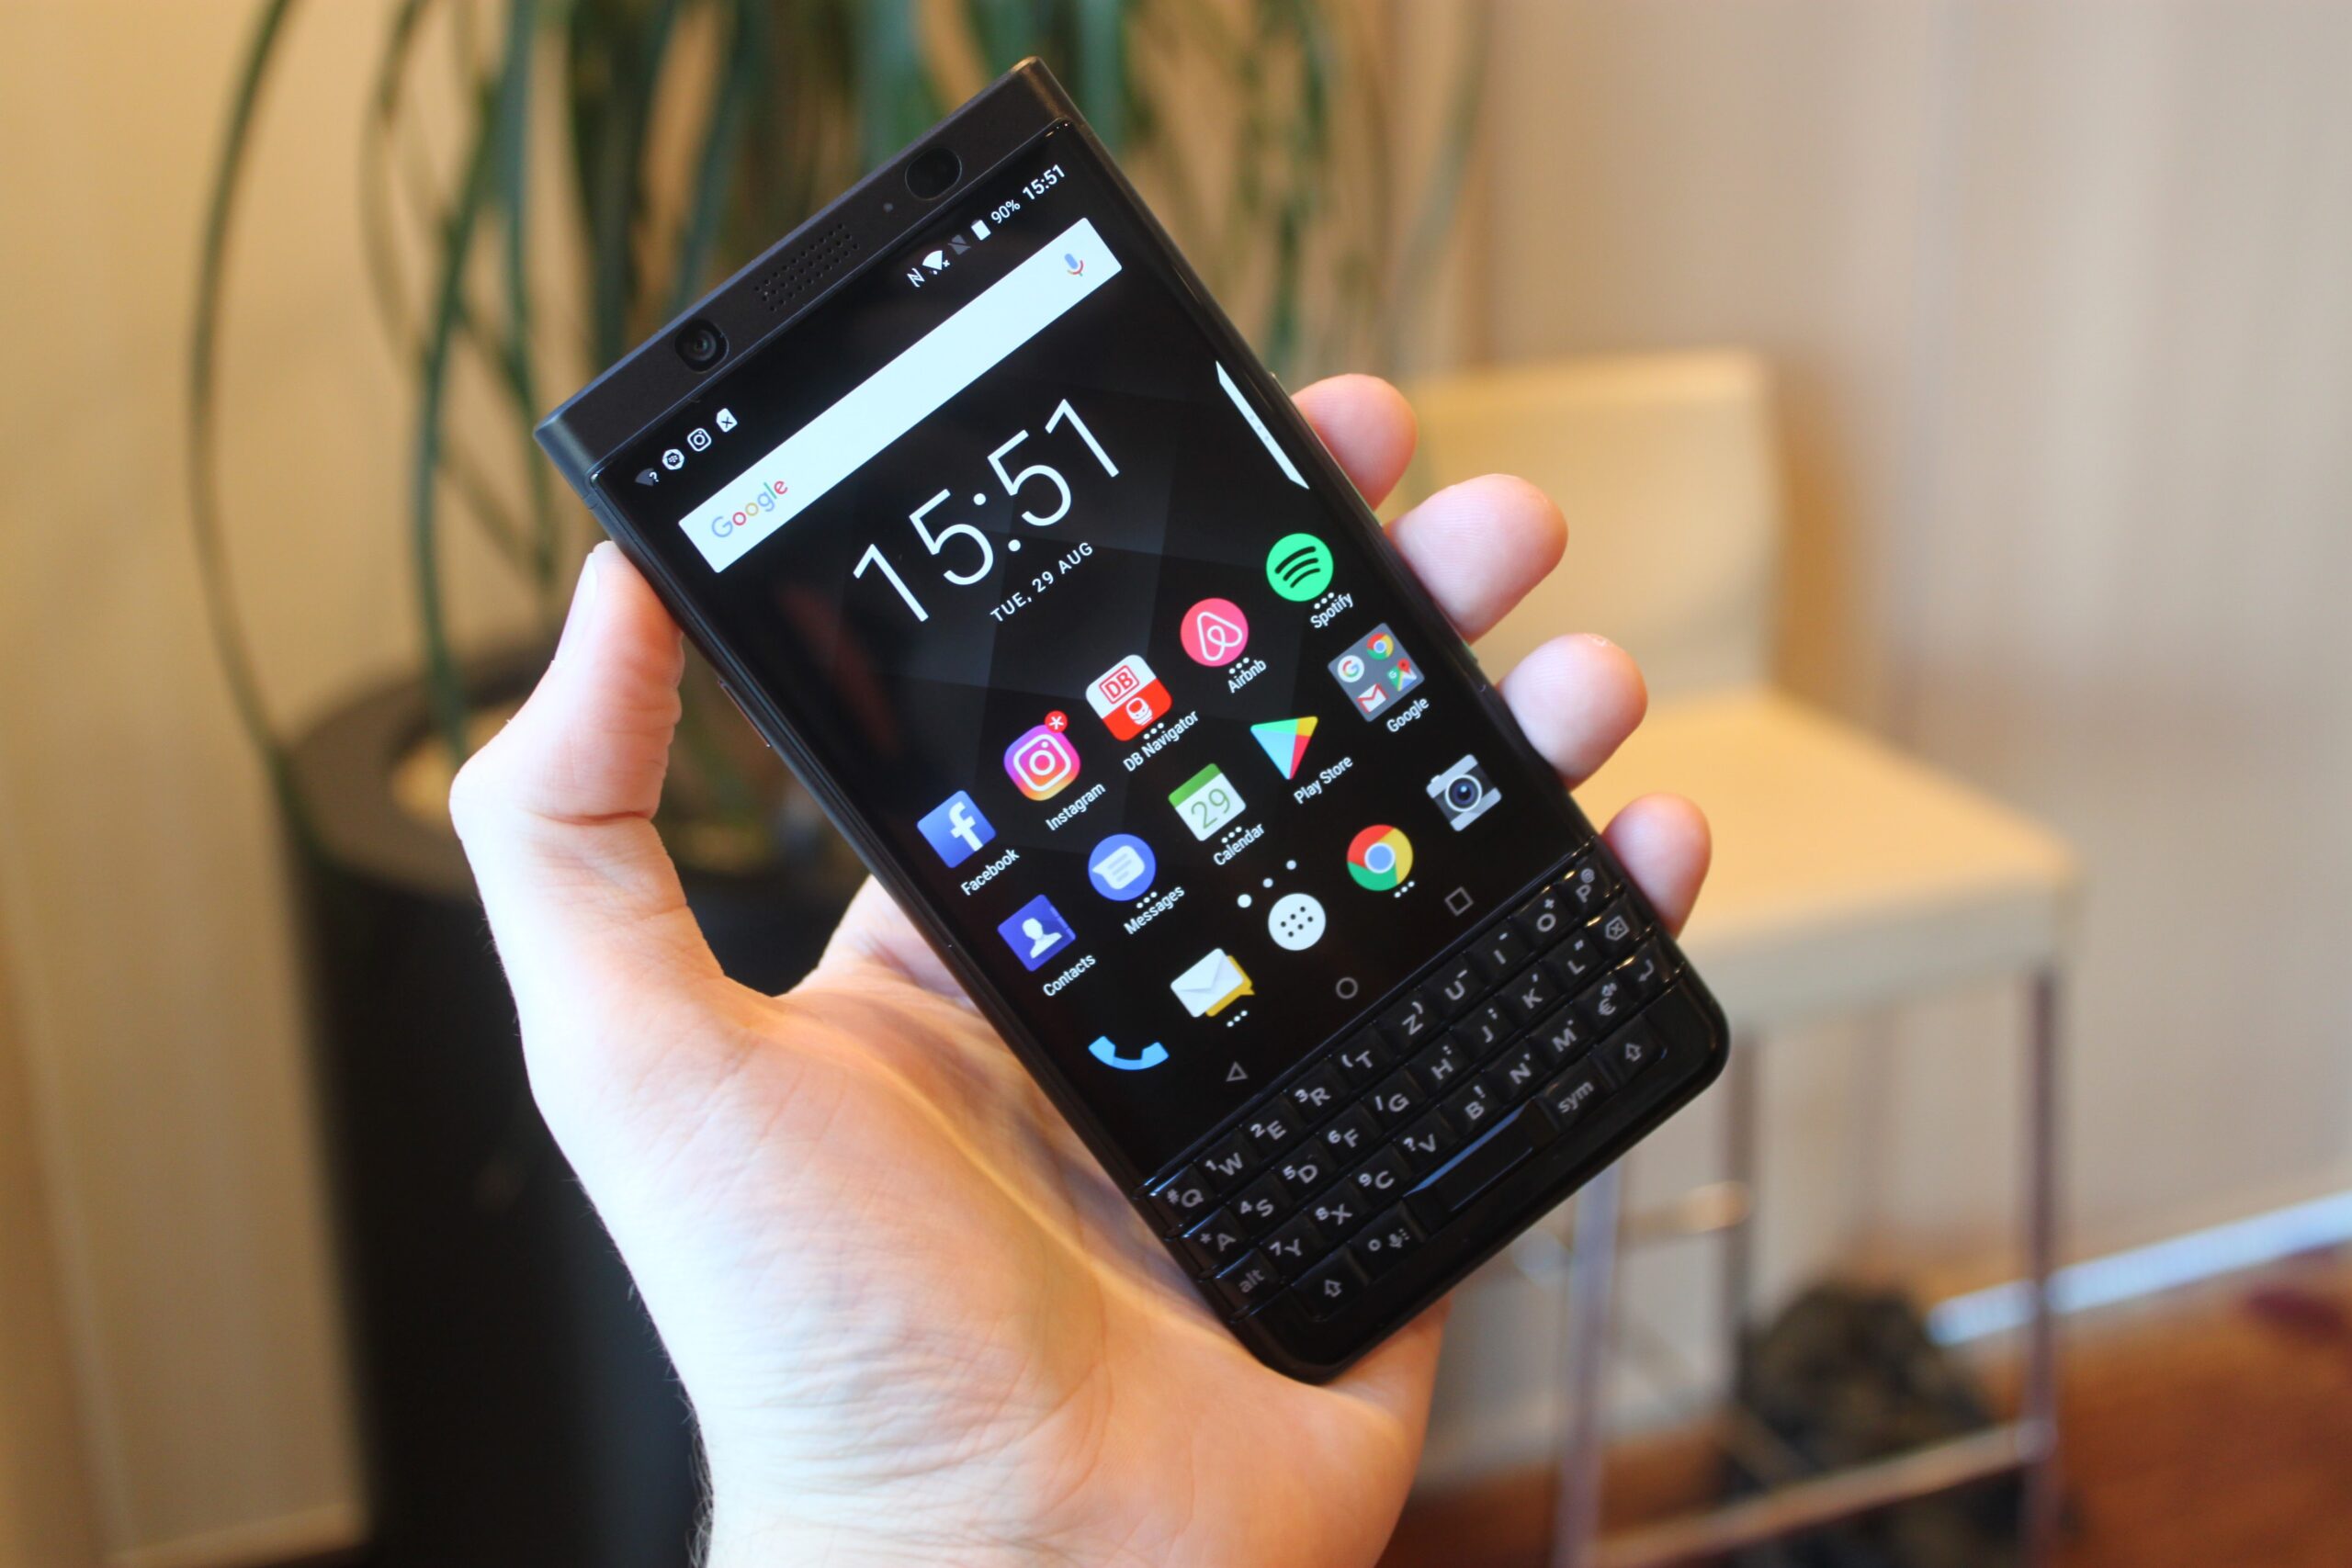 A Blackberry Keyone smartphone being held by a hand